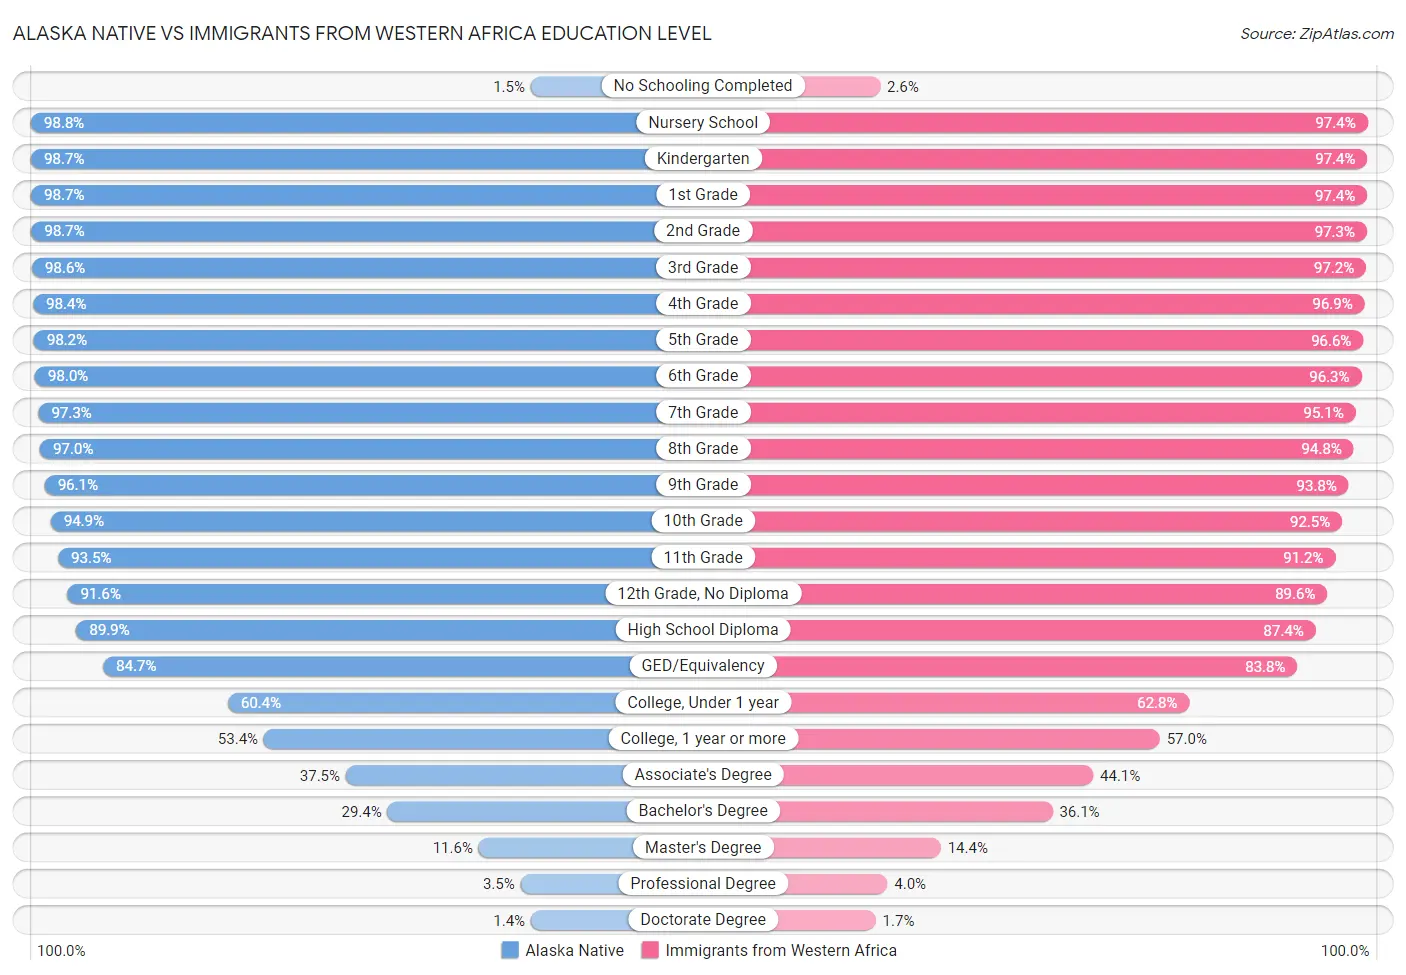 Alaska Native vs Immigrants from Western Africa Education Level